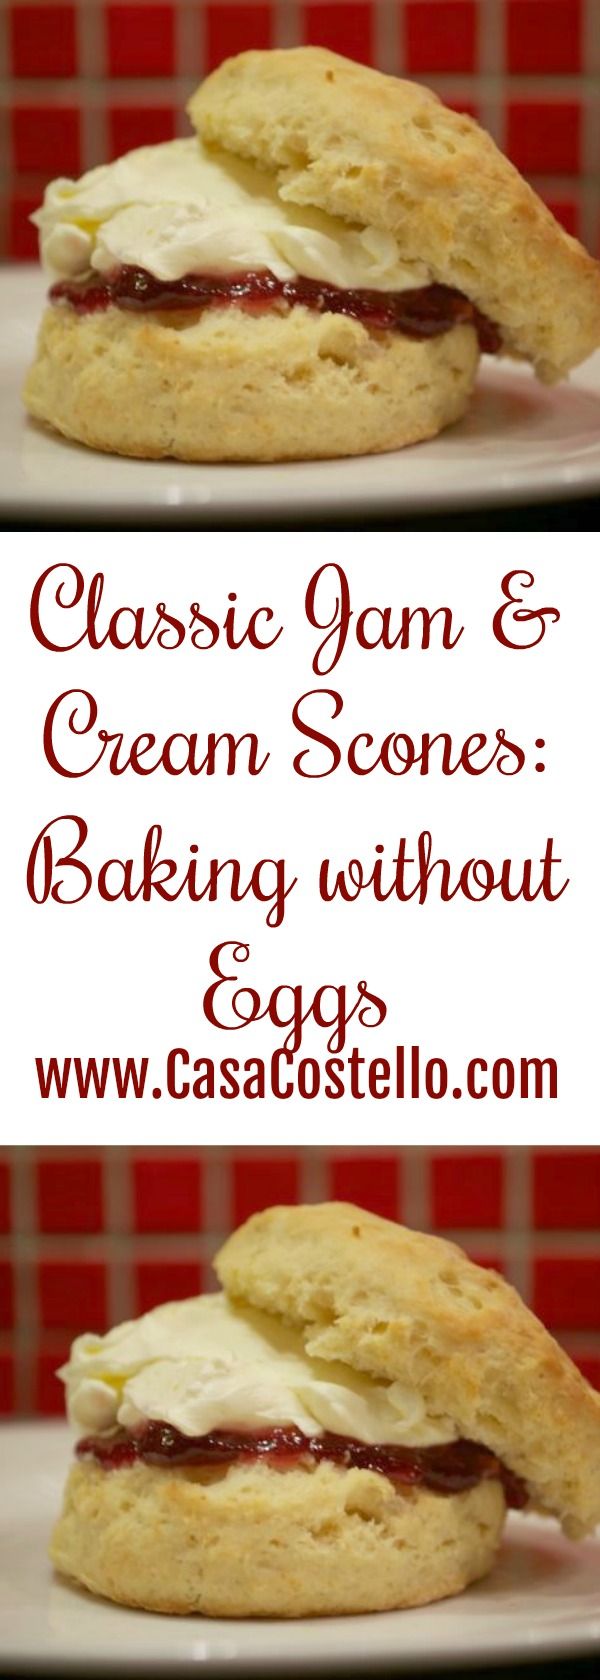 Can Scones Be Made Without Eggs